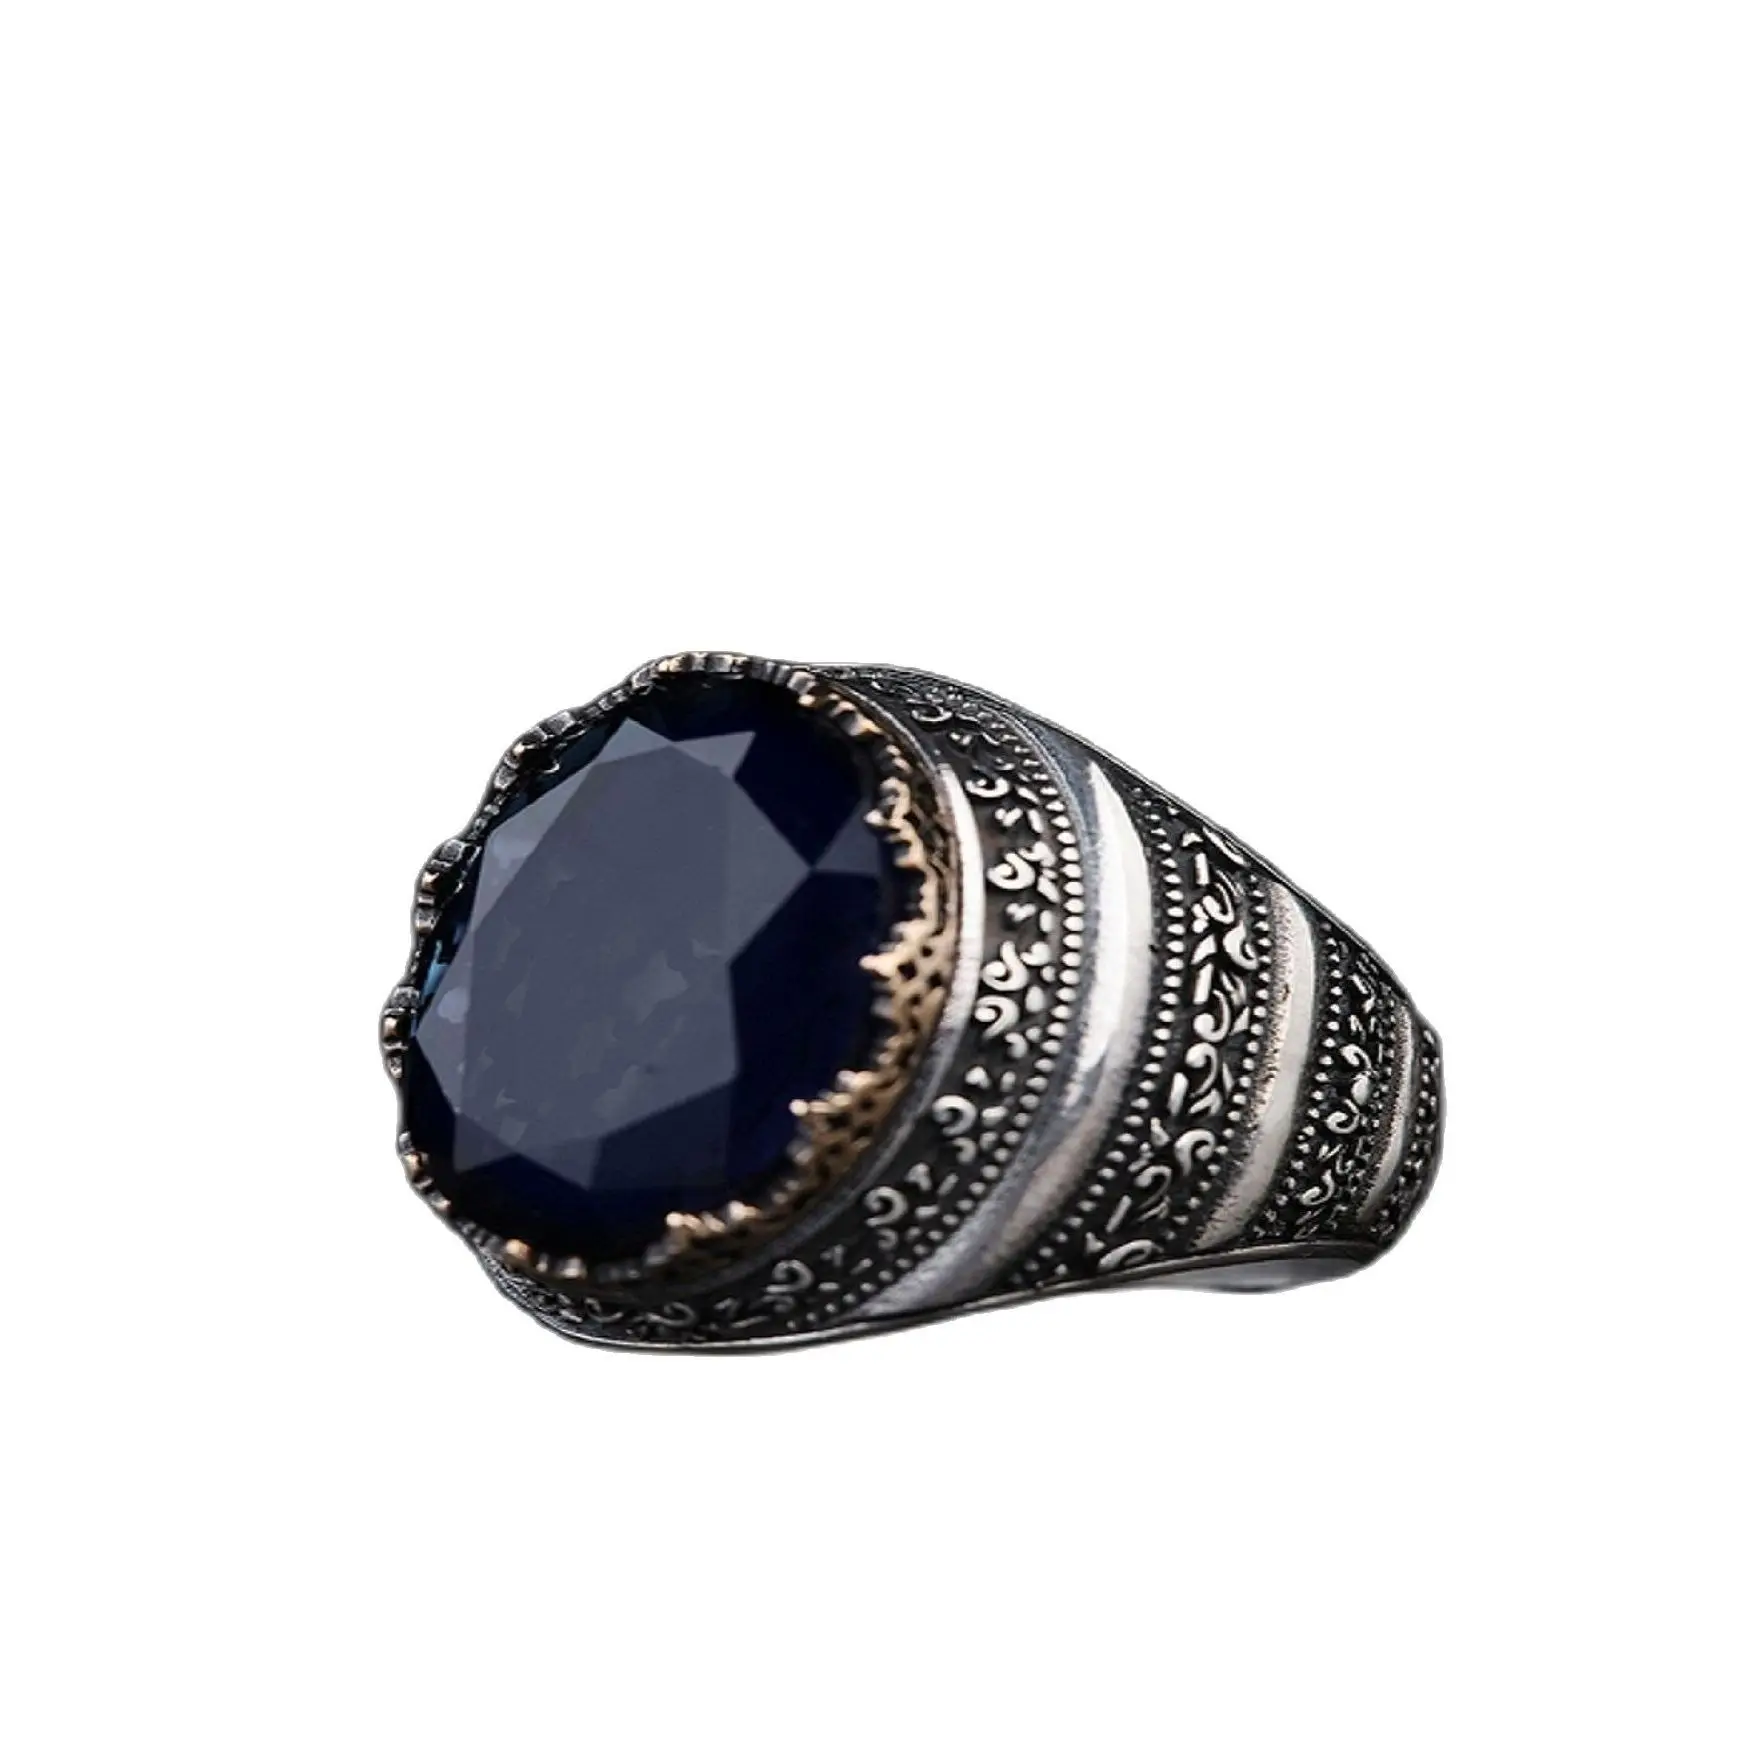 Navy Blue Onyx Mens Ring Gemstone Jewelry 925 Sterling Silver Oval Turkish Handmade Male Bands Jewellery Finger Ornaments